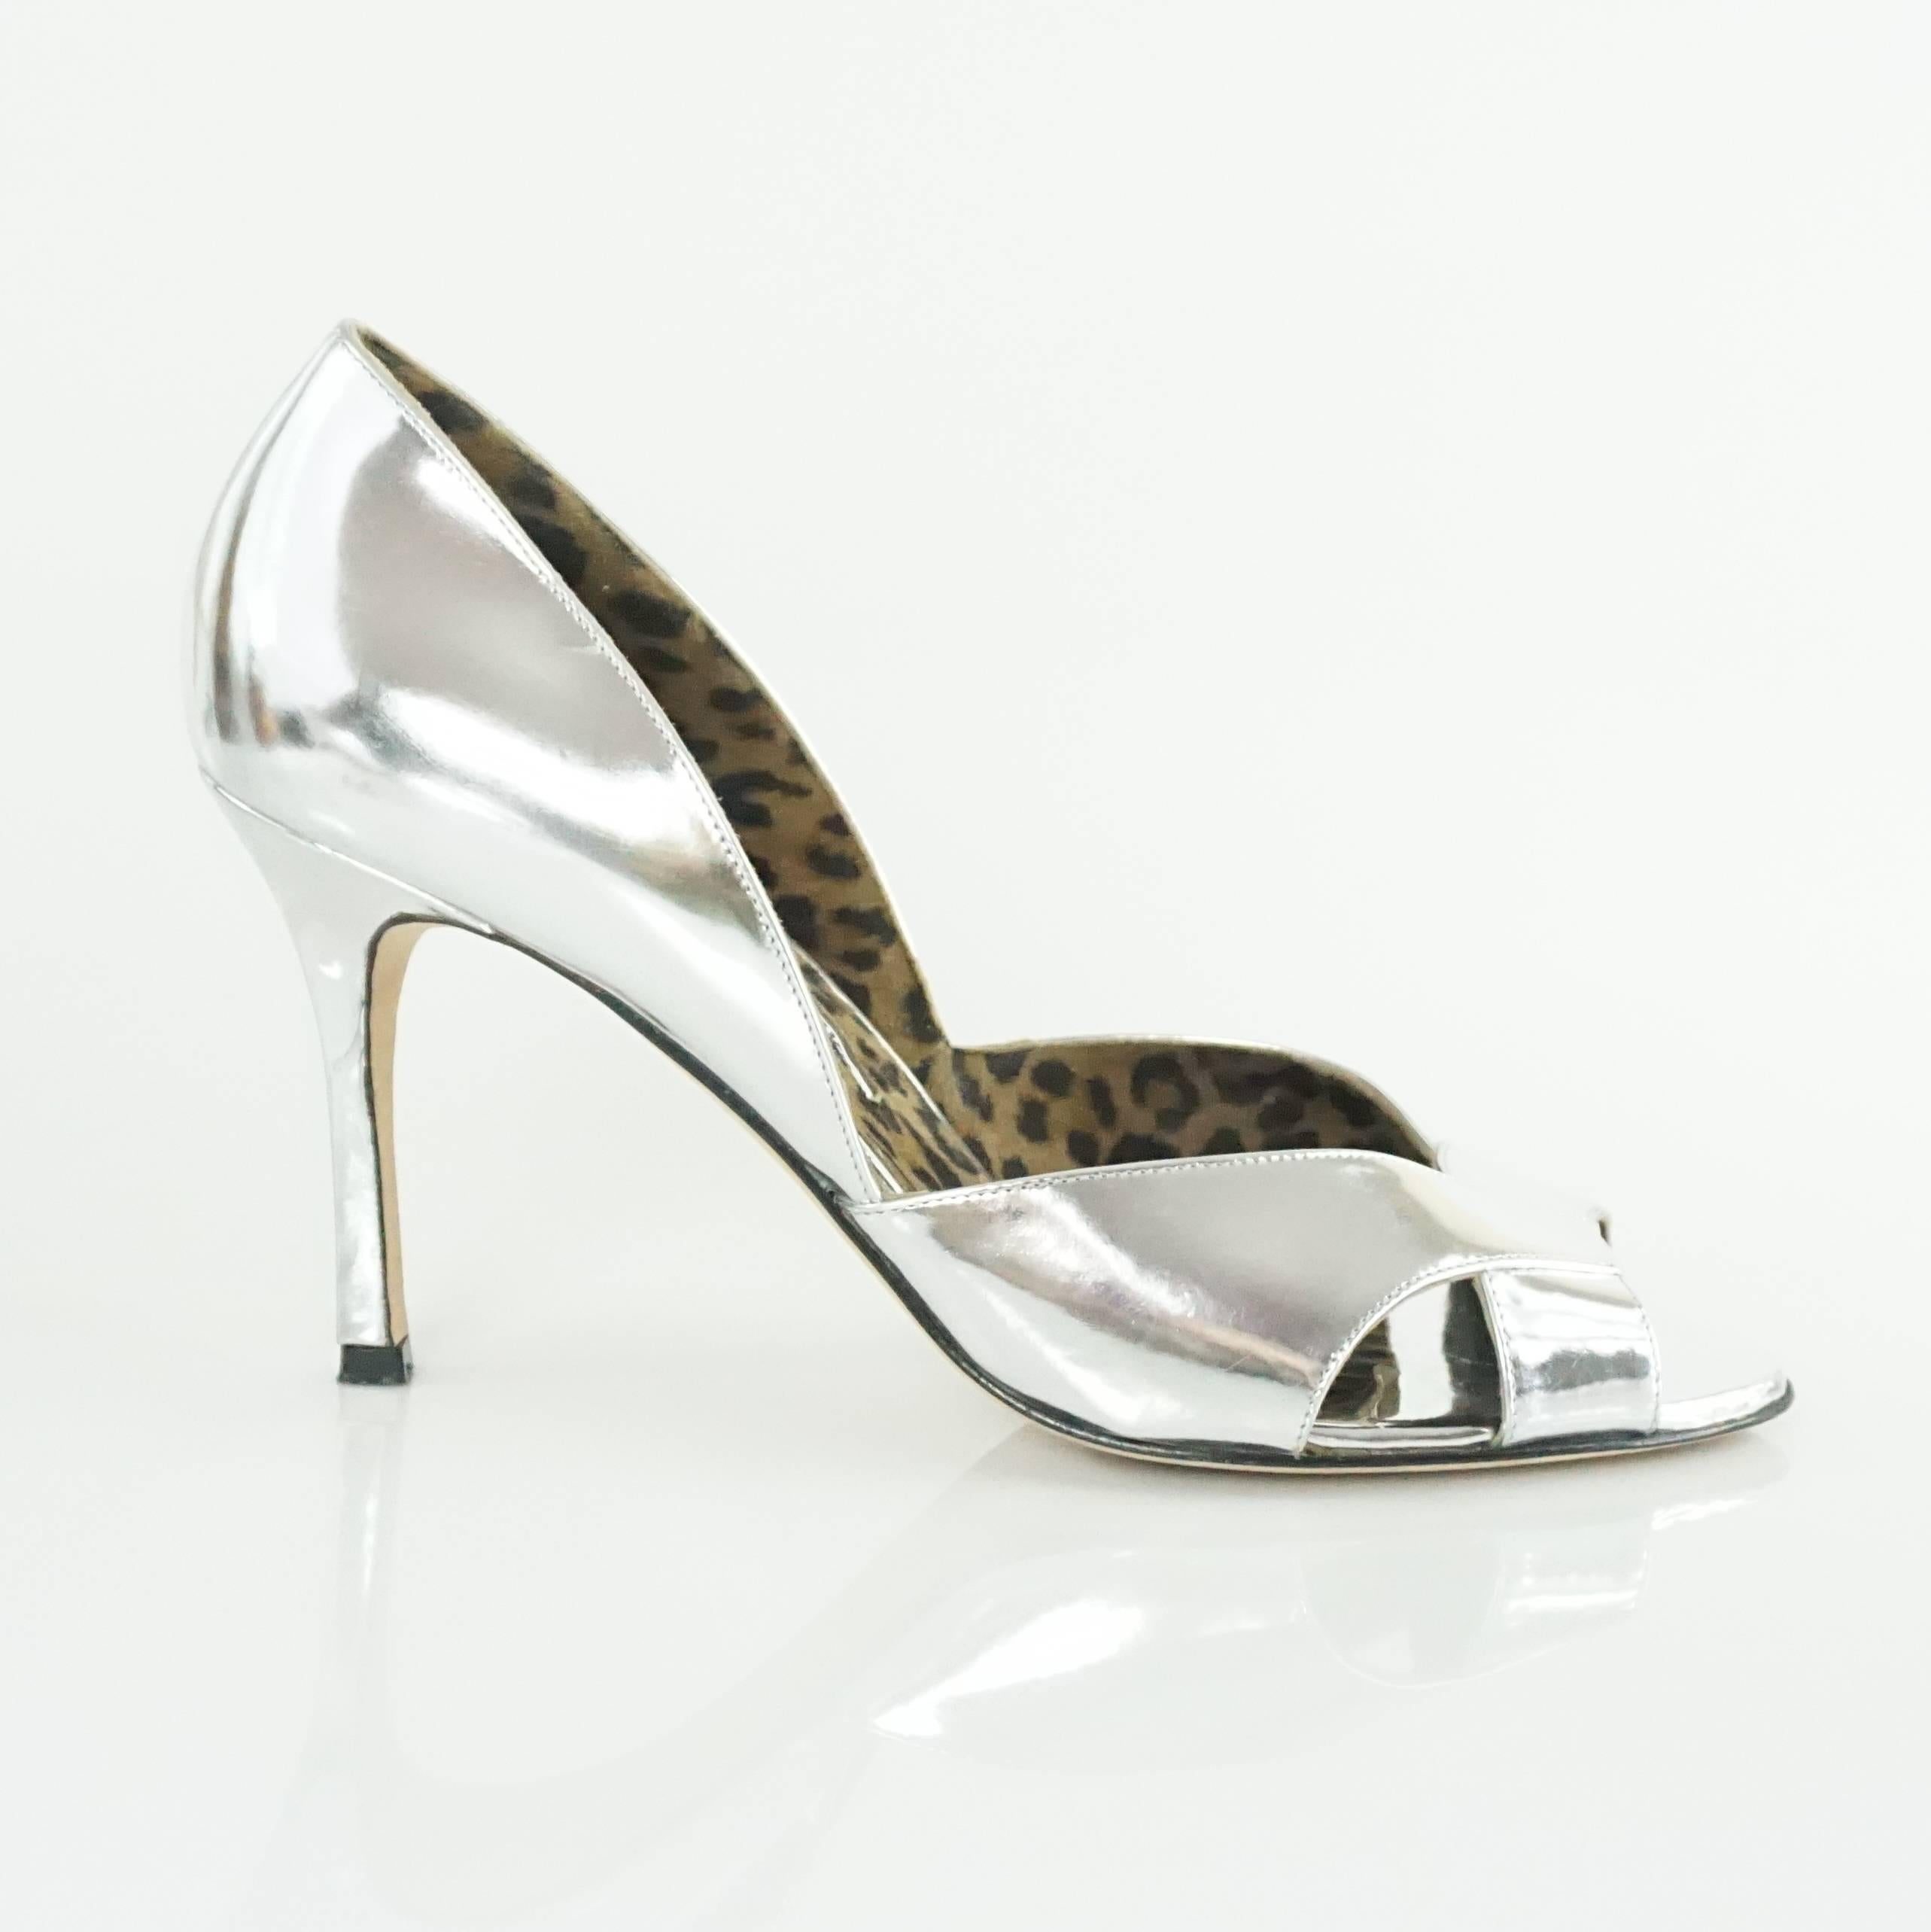 These Manolo Blahnik metallic silver Patent Leather D'Orsay heels have cutouts and an open toe. They are in good condition with minor bottom wear, and some light scratching.

Measurements
Heel Height: 3.5"